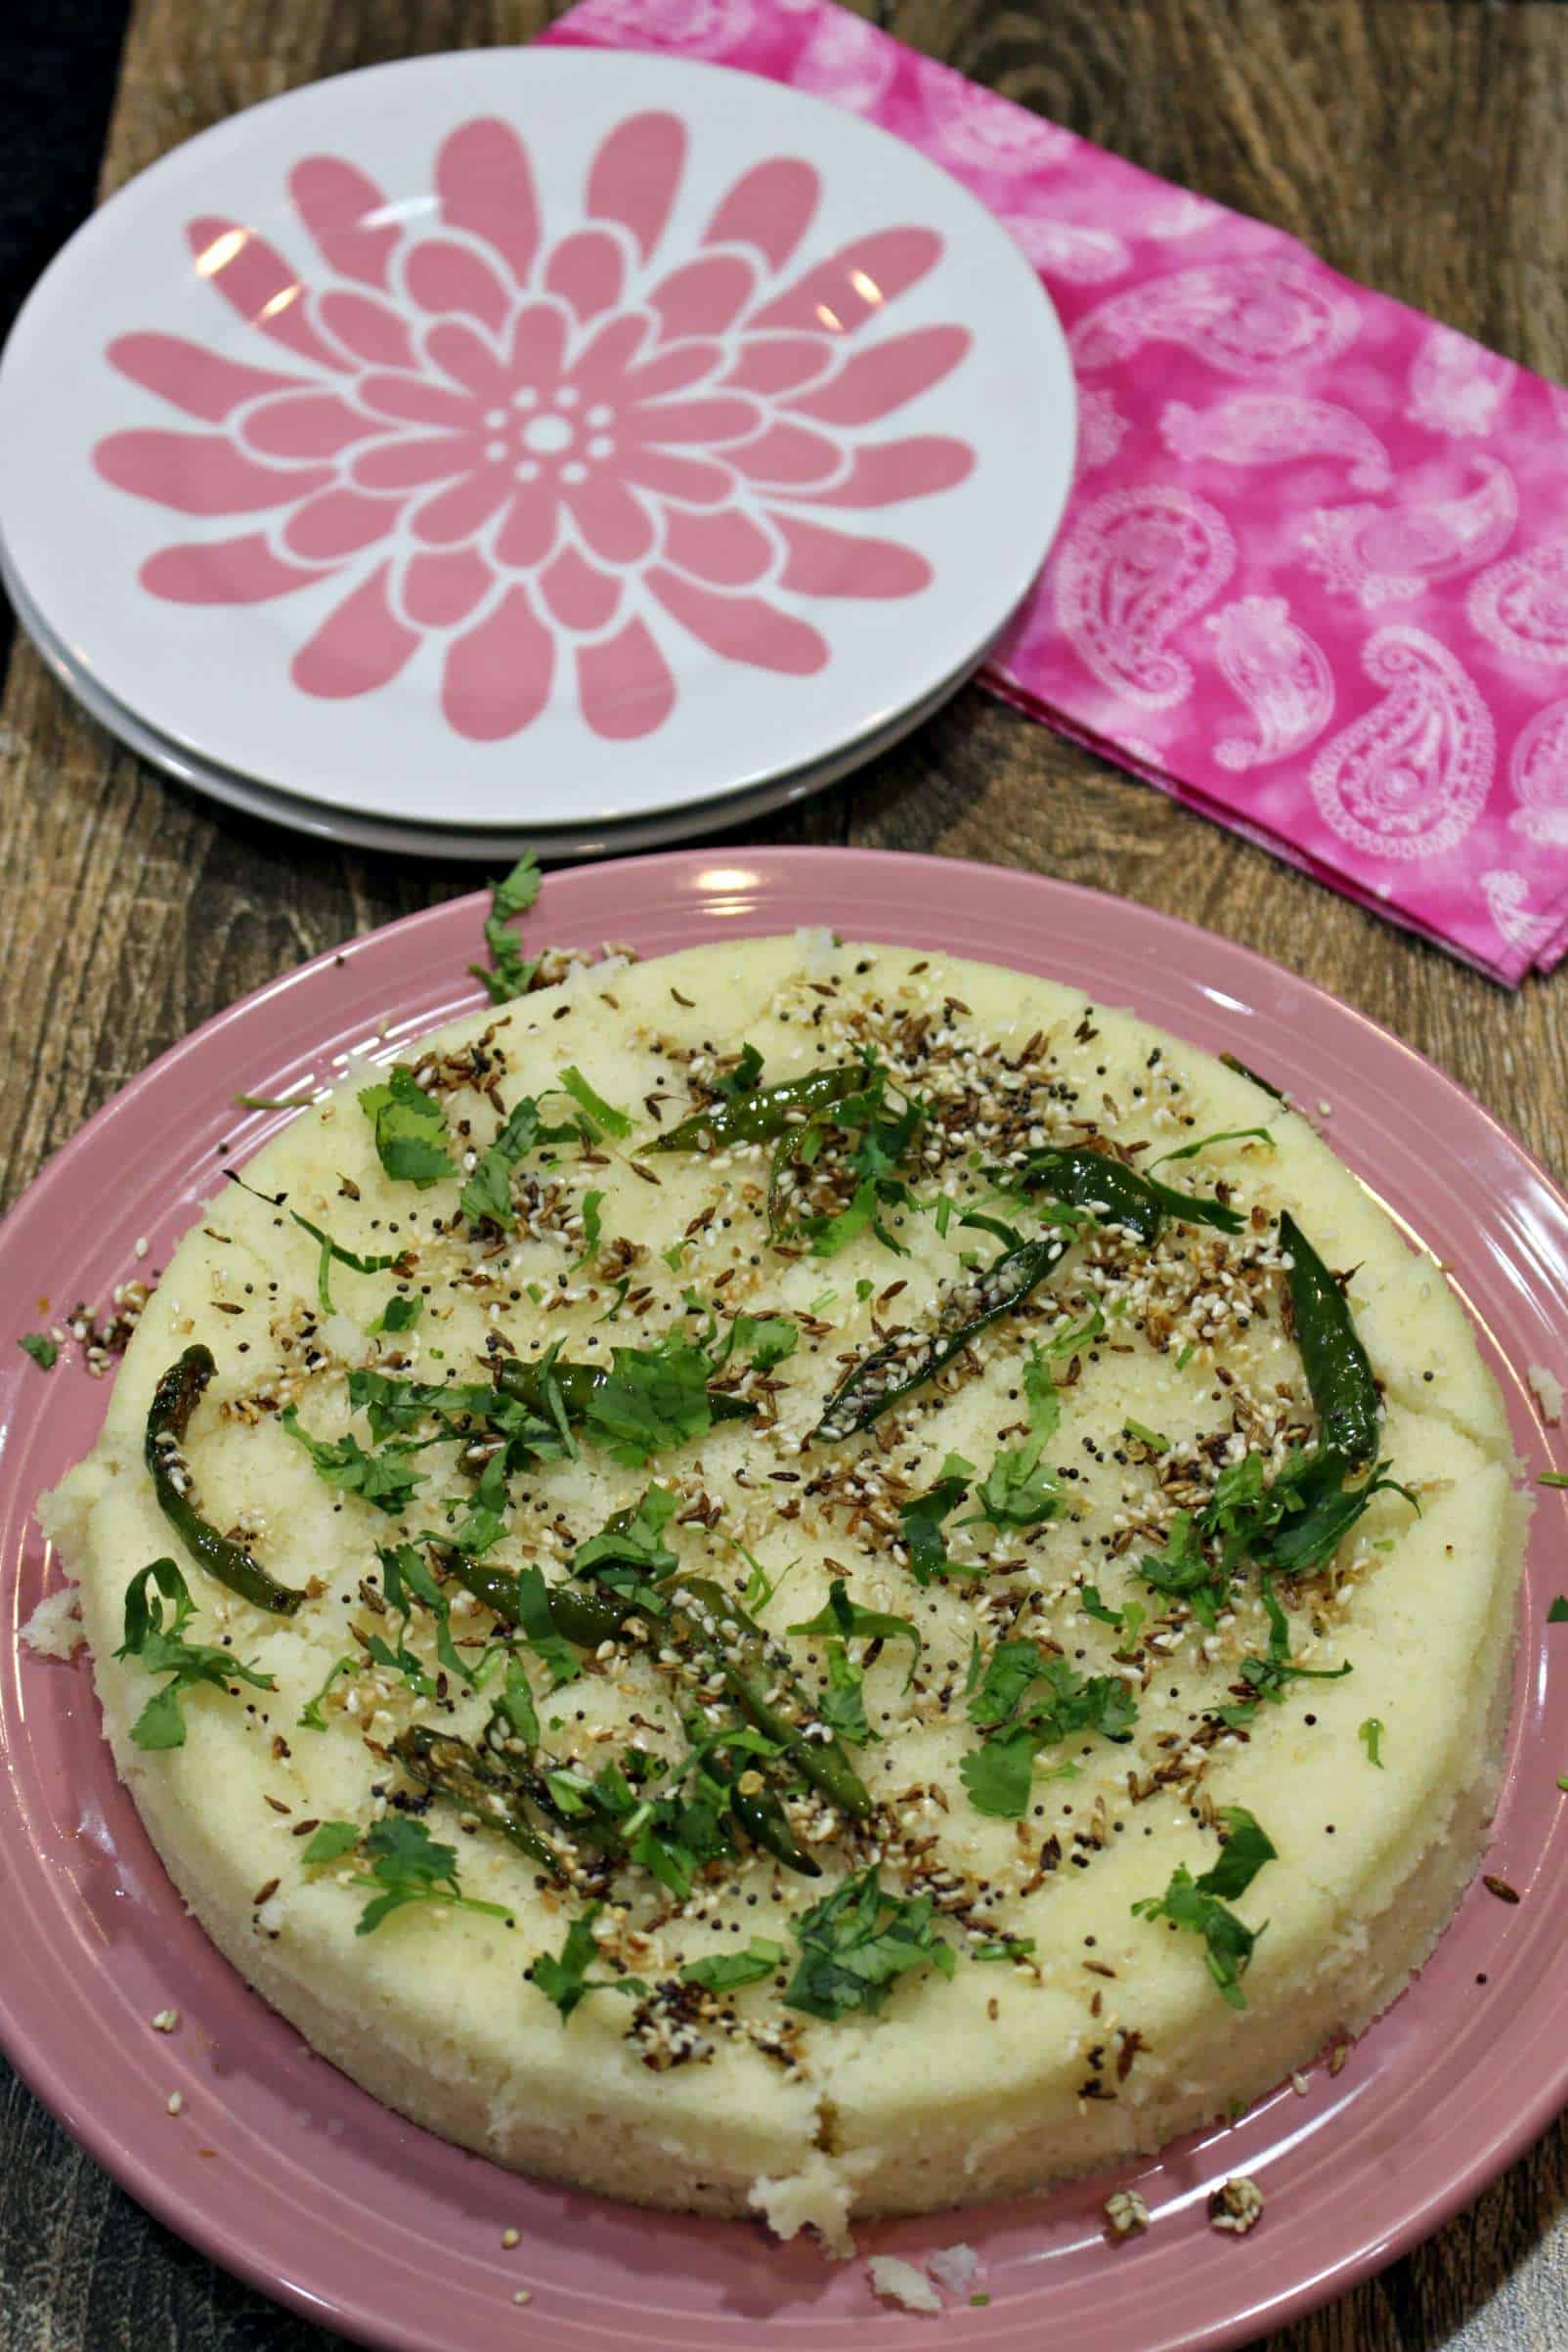 Instant Dhokla In a Dish with green chilly